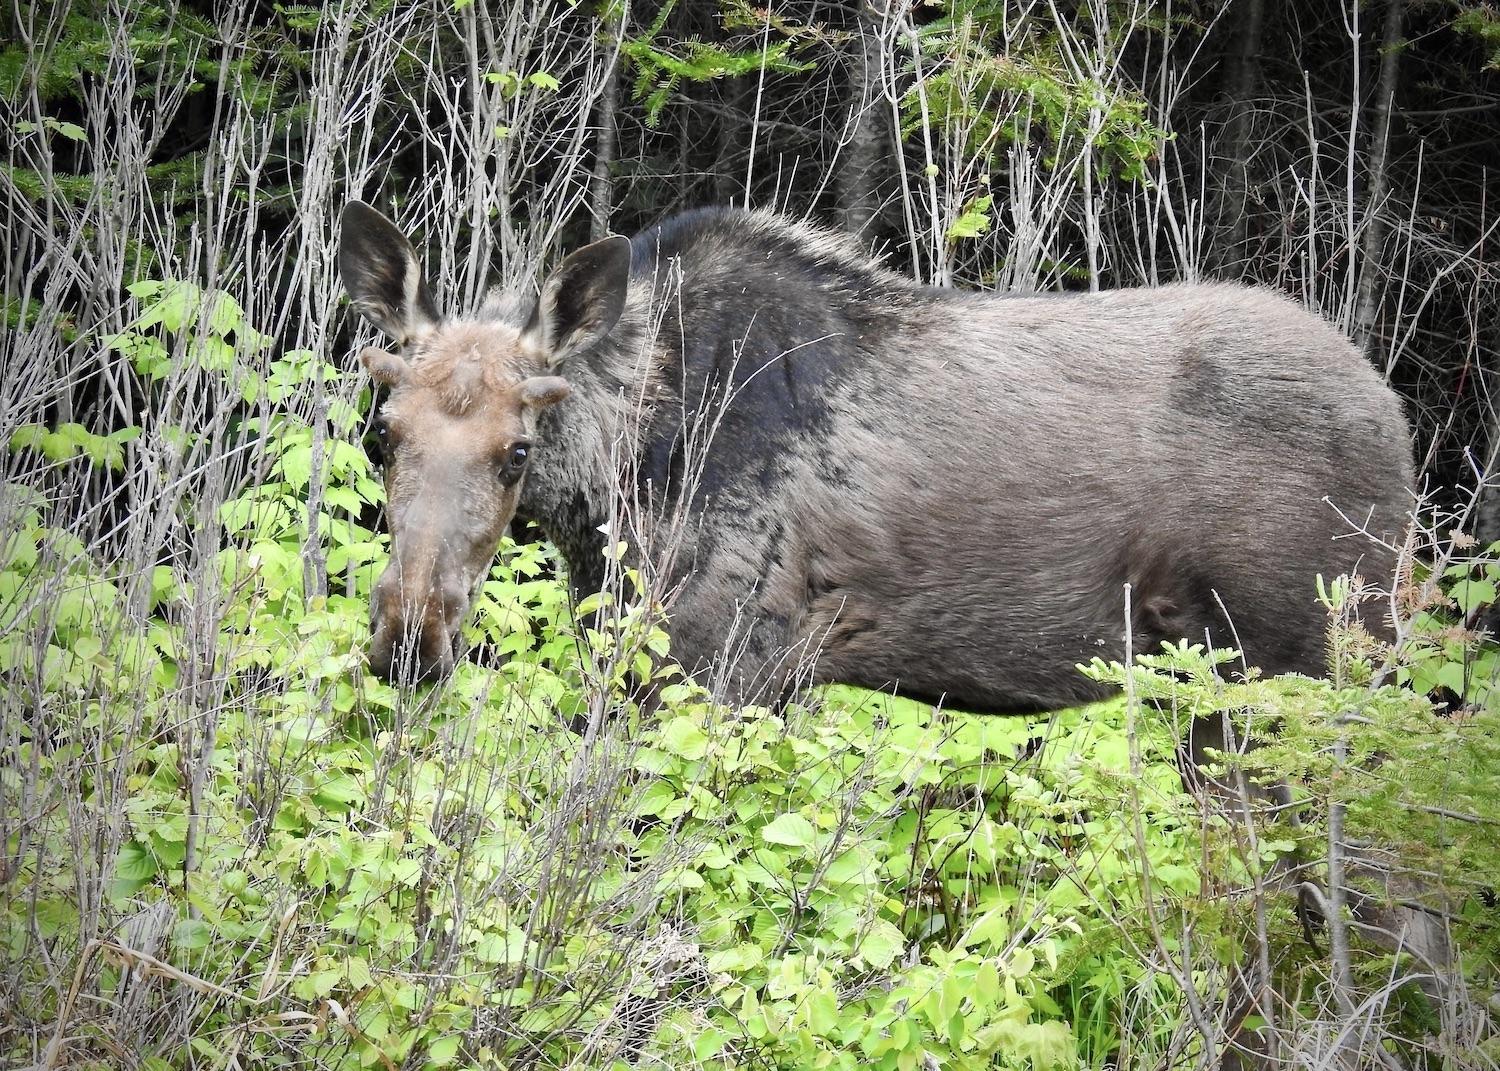 During a Lake Superior road trip in June, I spotted this young moose grazing by the Trans-Canada Highway west of Nipigon, Ontario. 